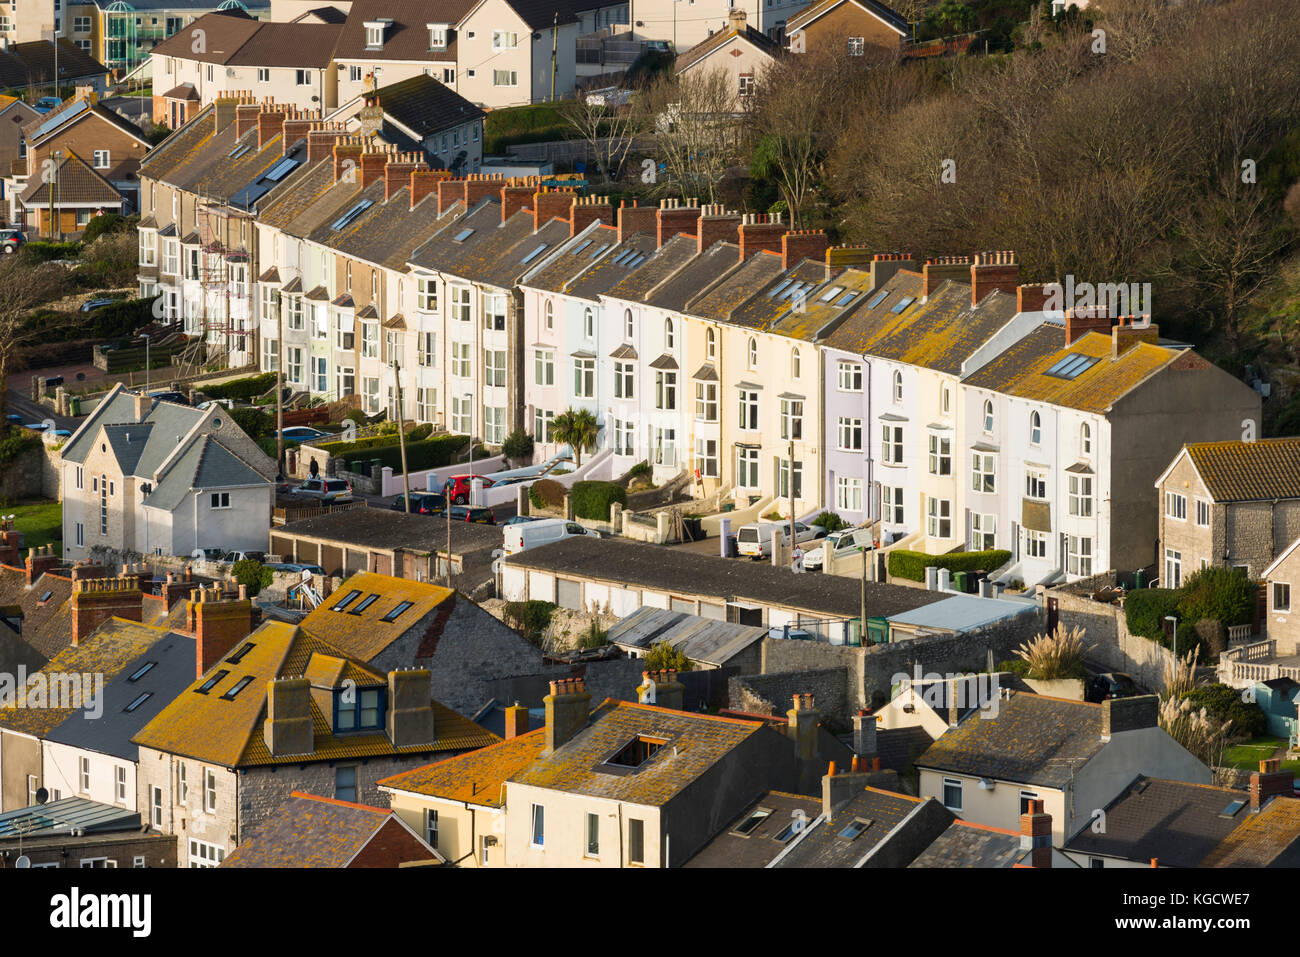 A view of houses and rooftops at Fortuneswell on the Isle of Portland in Dorset.  Picture Credit: Graham Hunt/Alamy Stock Photo